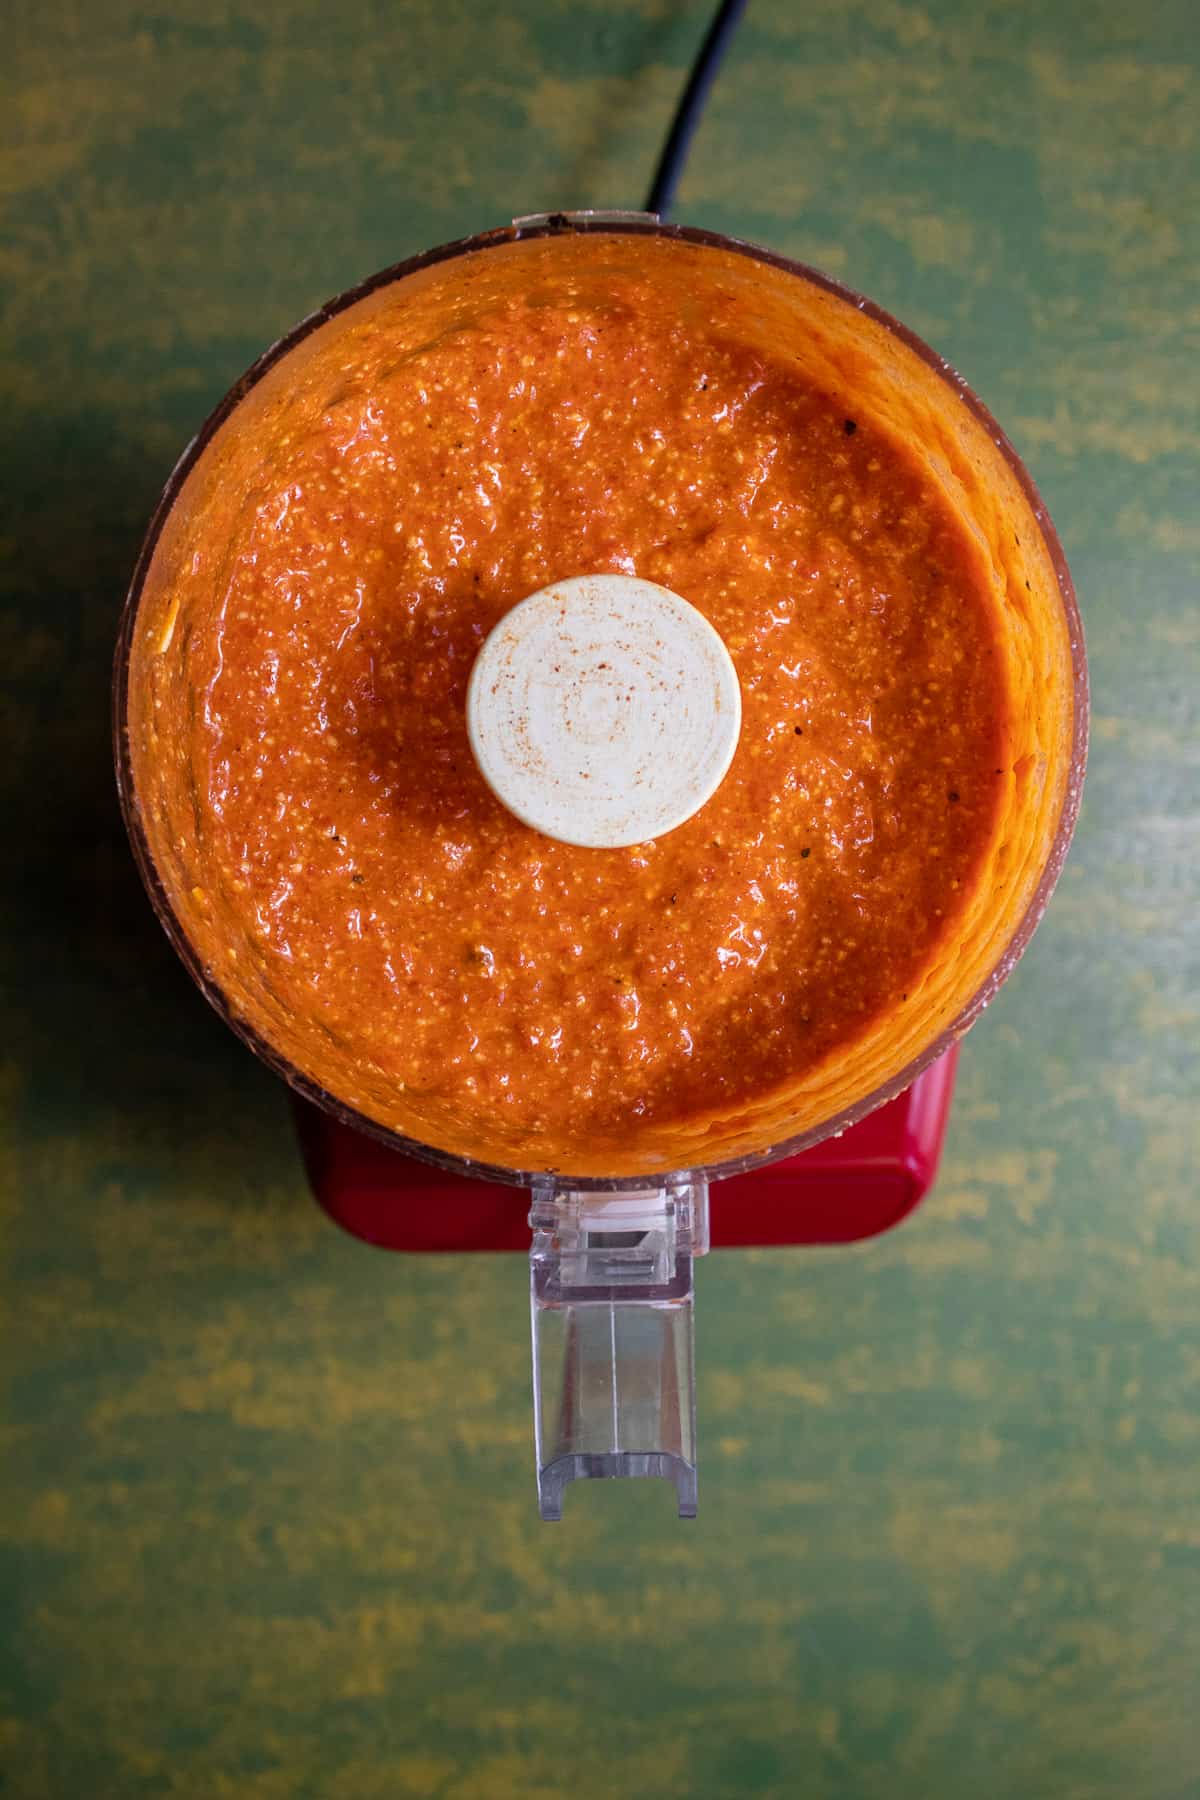 The bright orange sauce after being blended in the mini processor.